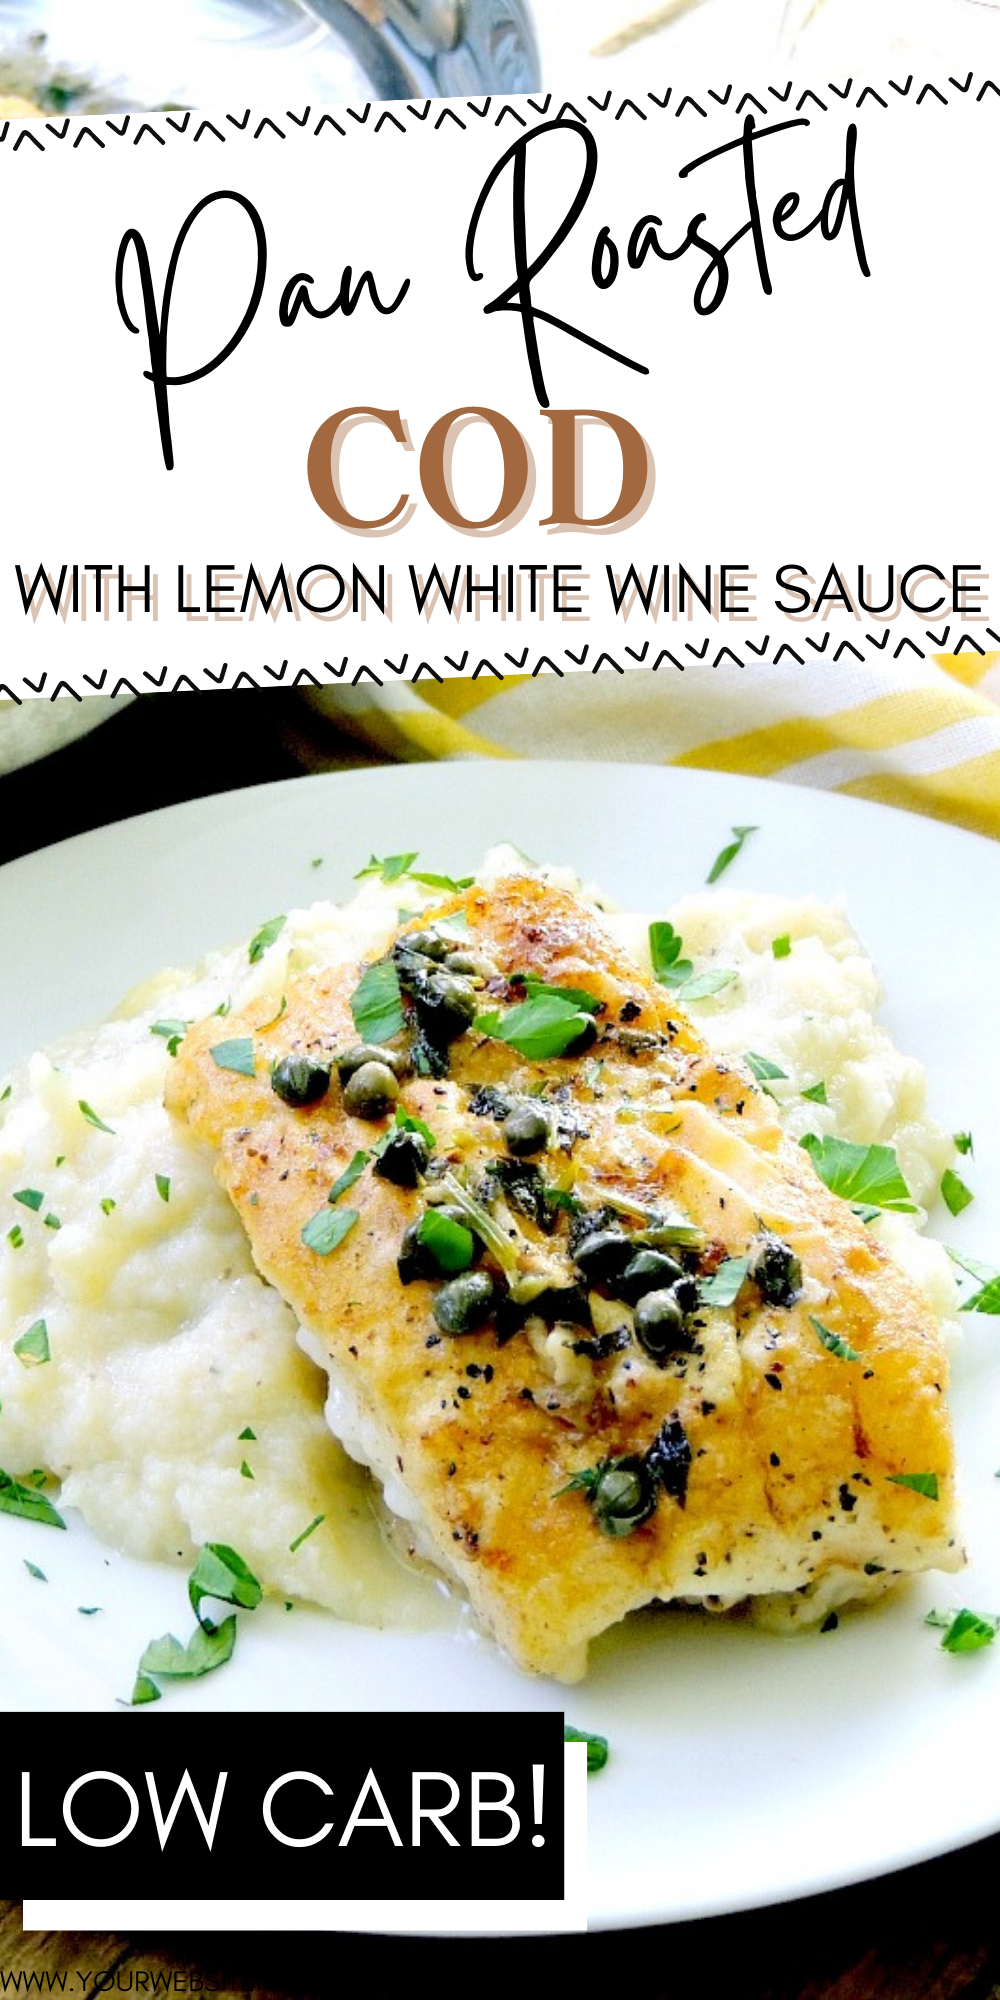 Pinterest graphic with the image of pan roasted cod with lemon white wine sauce on it.